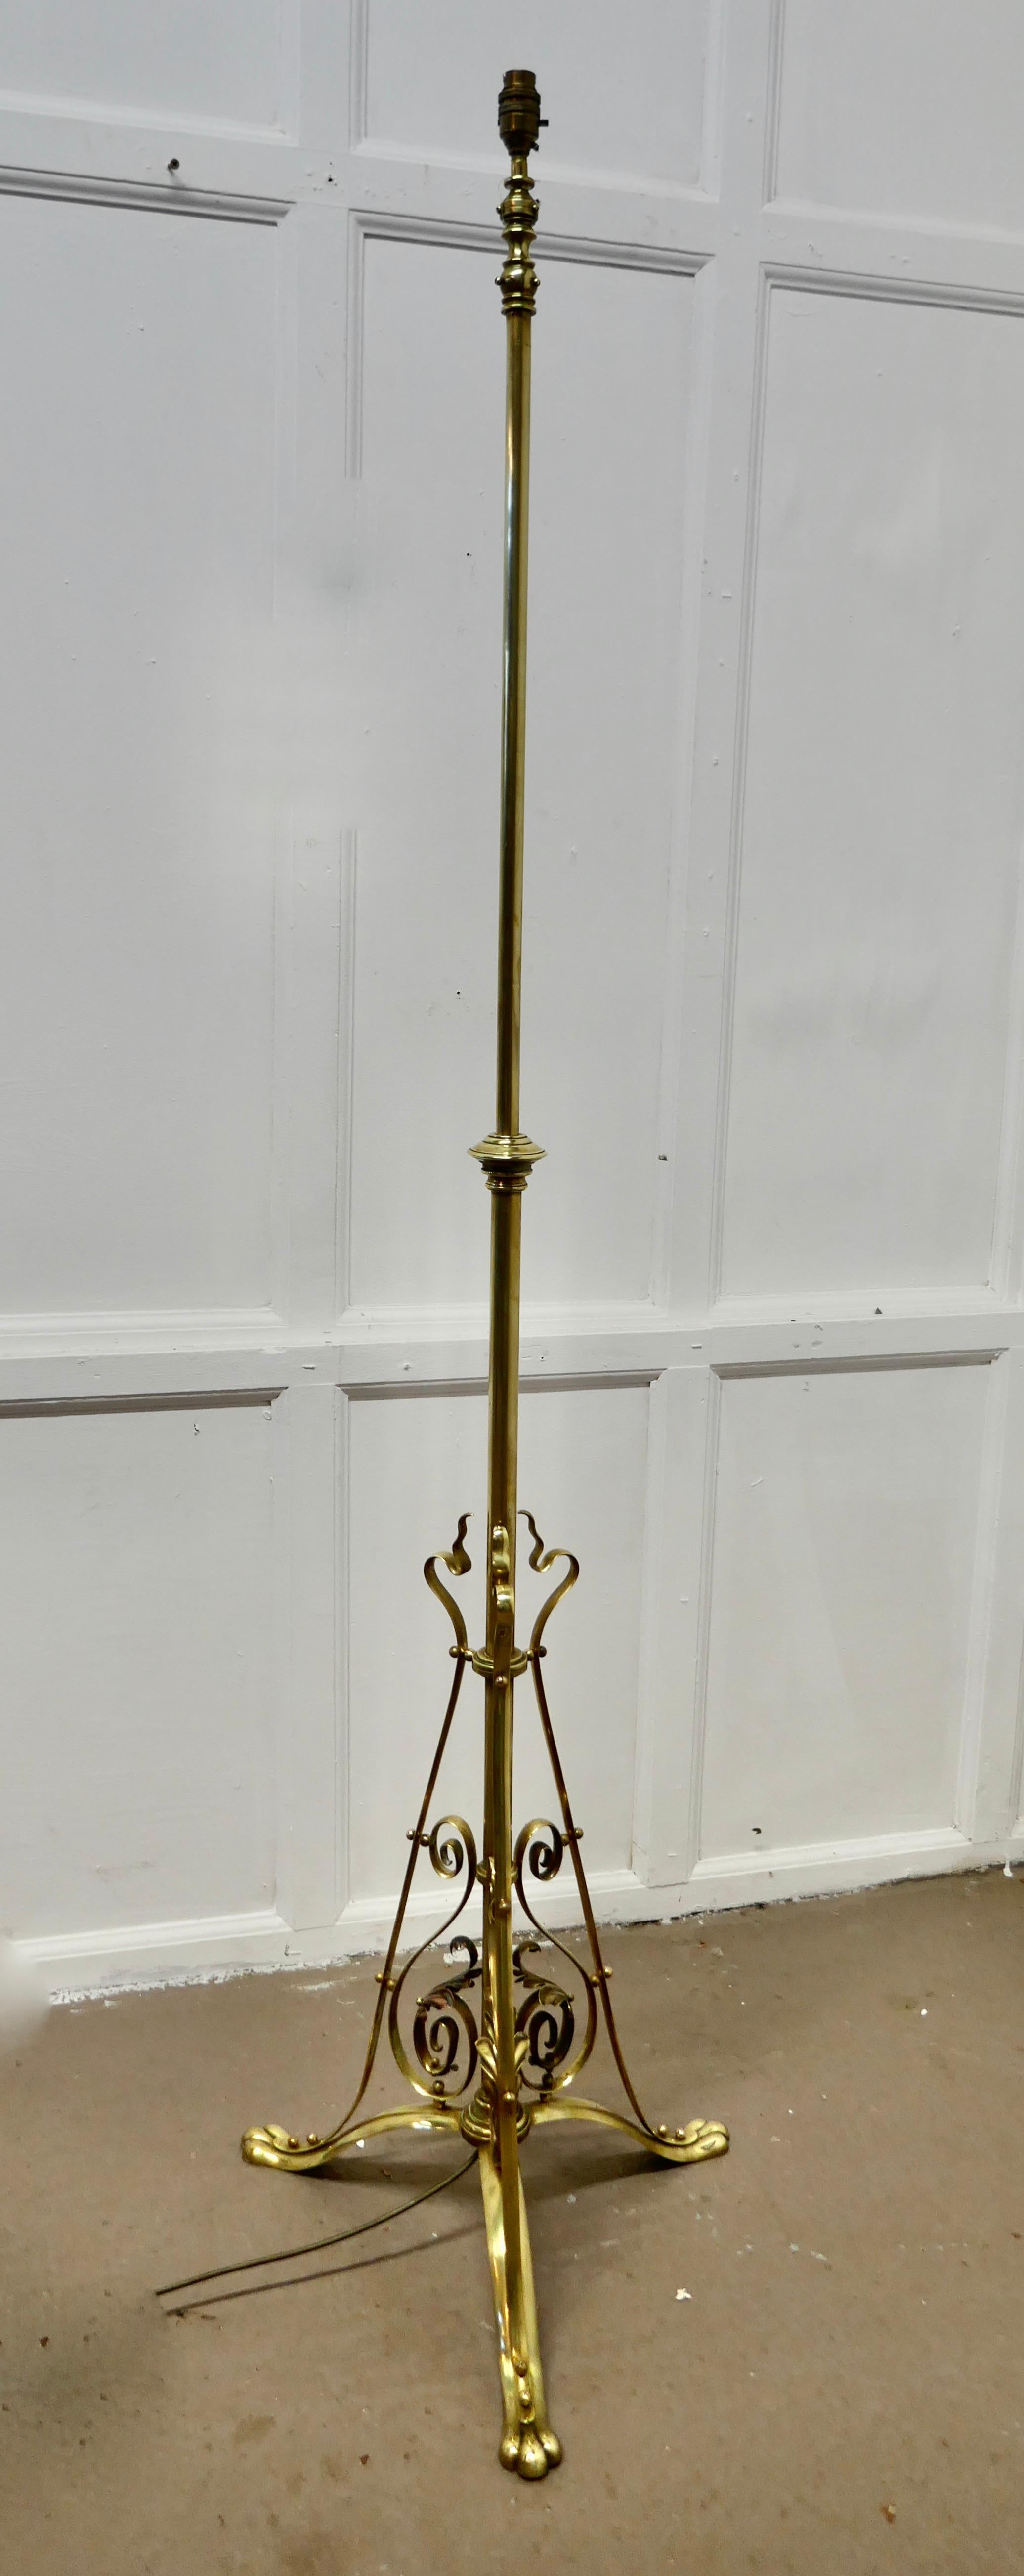 19th Century Adjustable Brass Floor Lamp in the Arts & Crafts Style